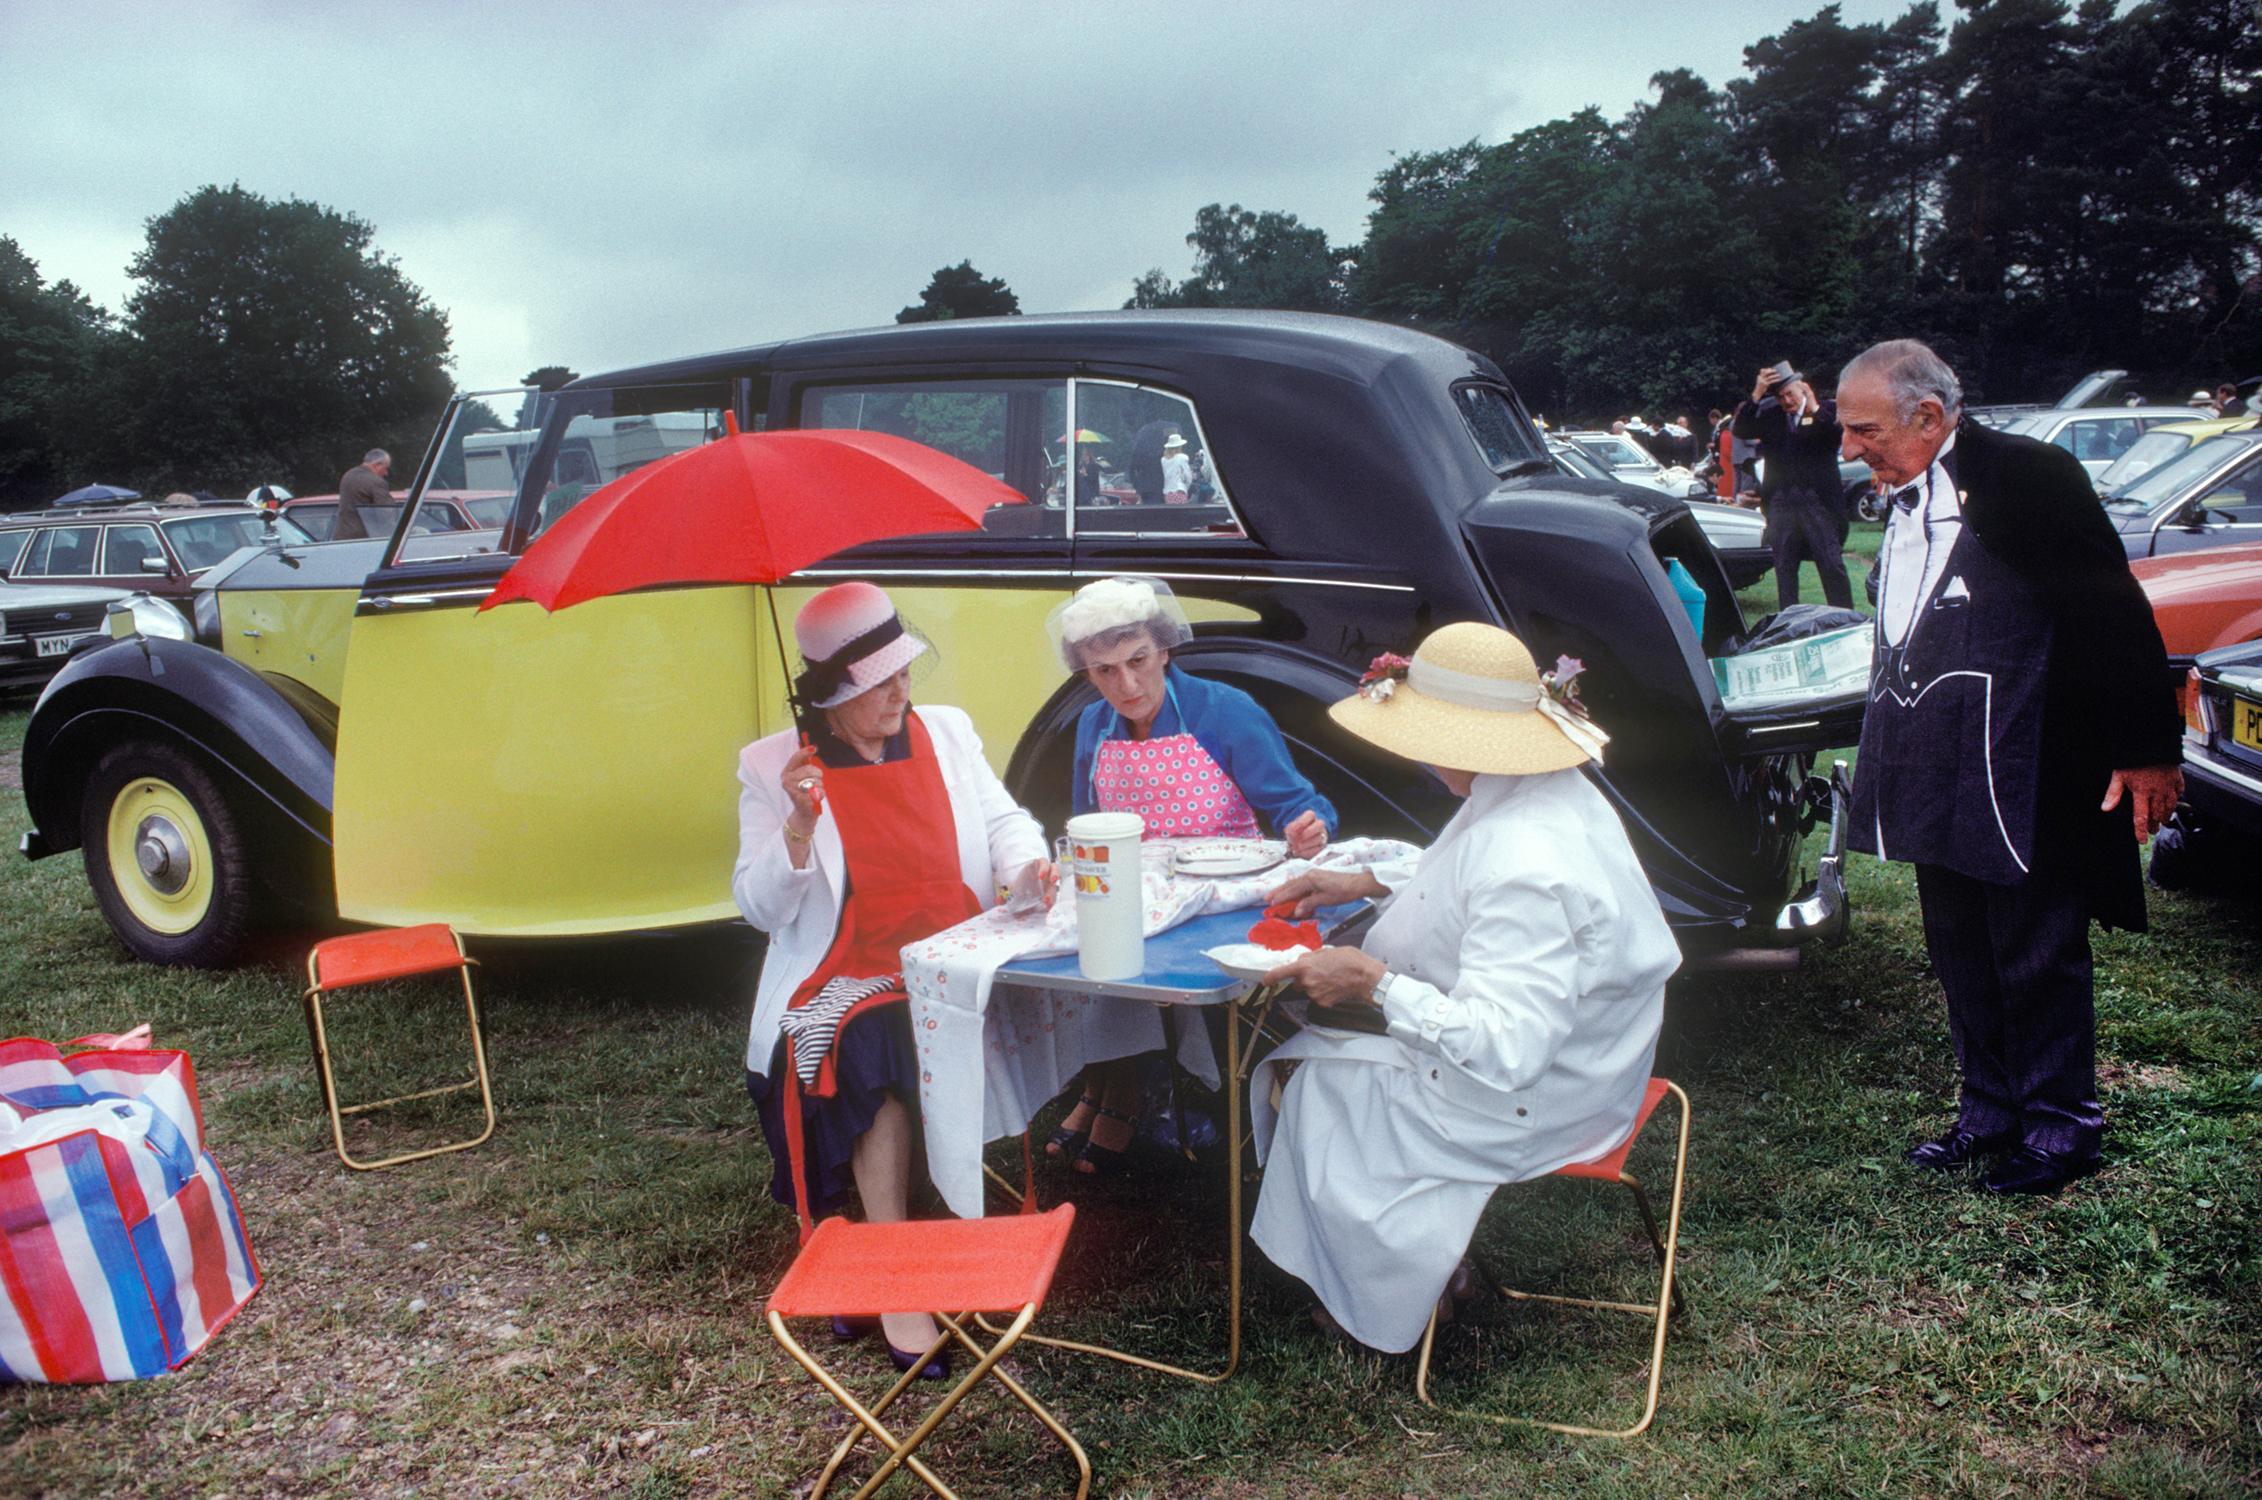 Homer Sykes  Color Photograph - Royal Ascot Car Park Picnic England - oversized signed limited edition print